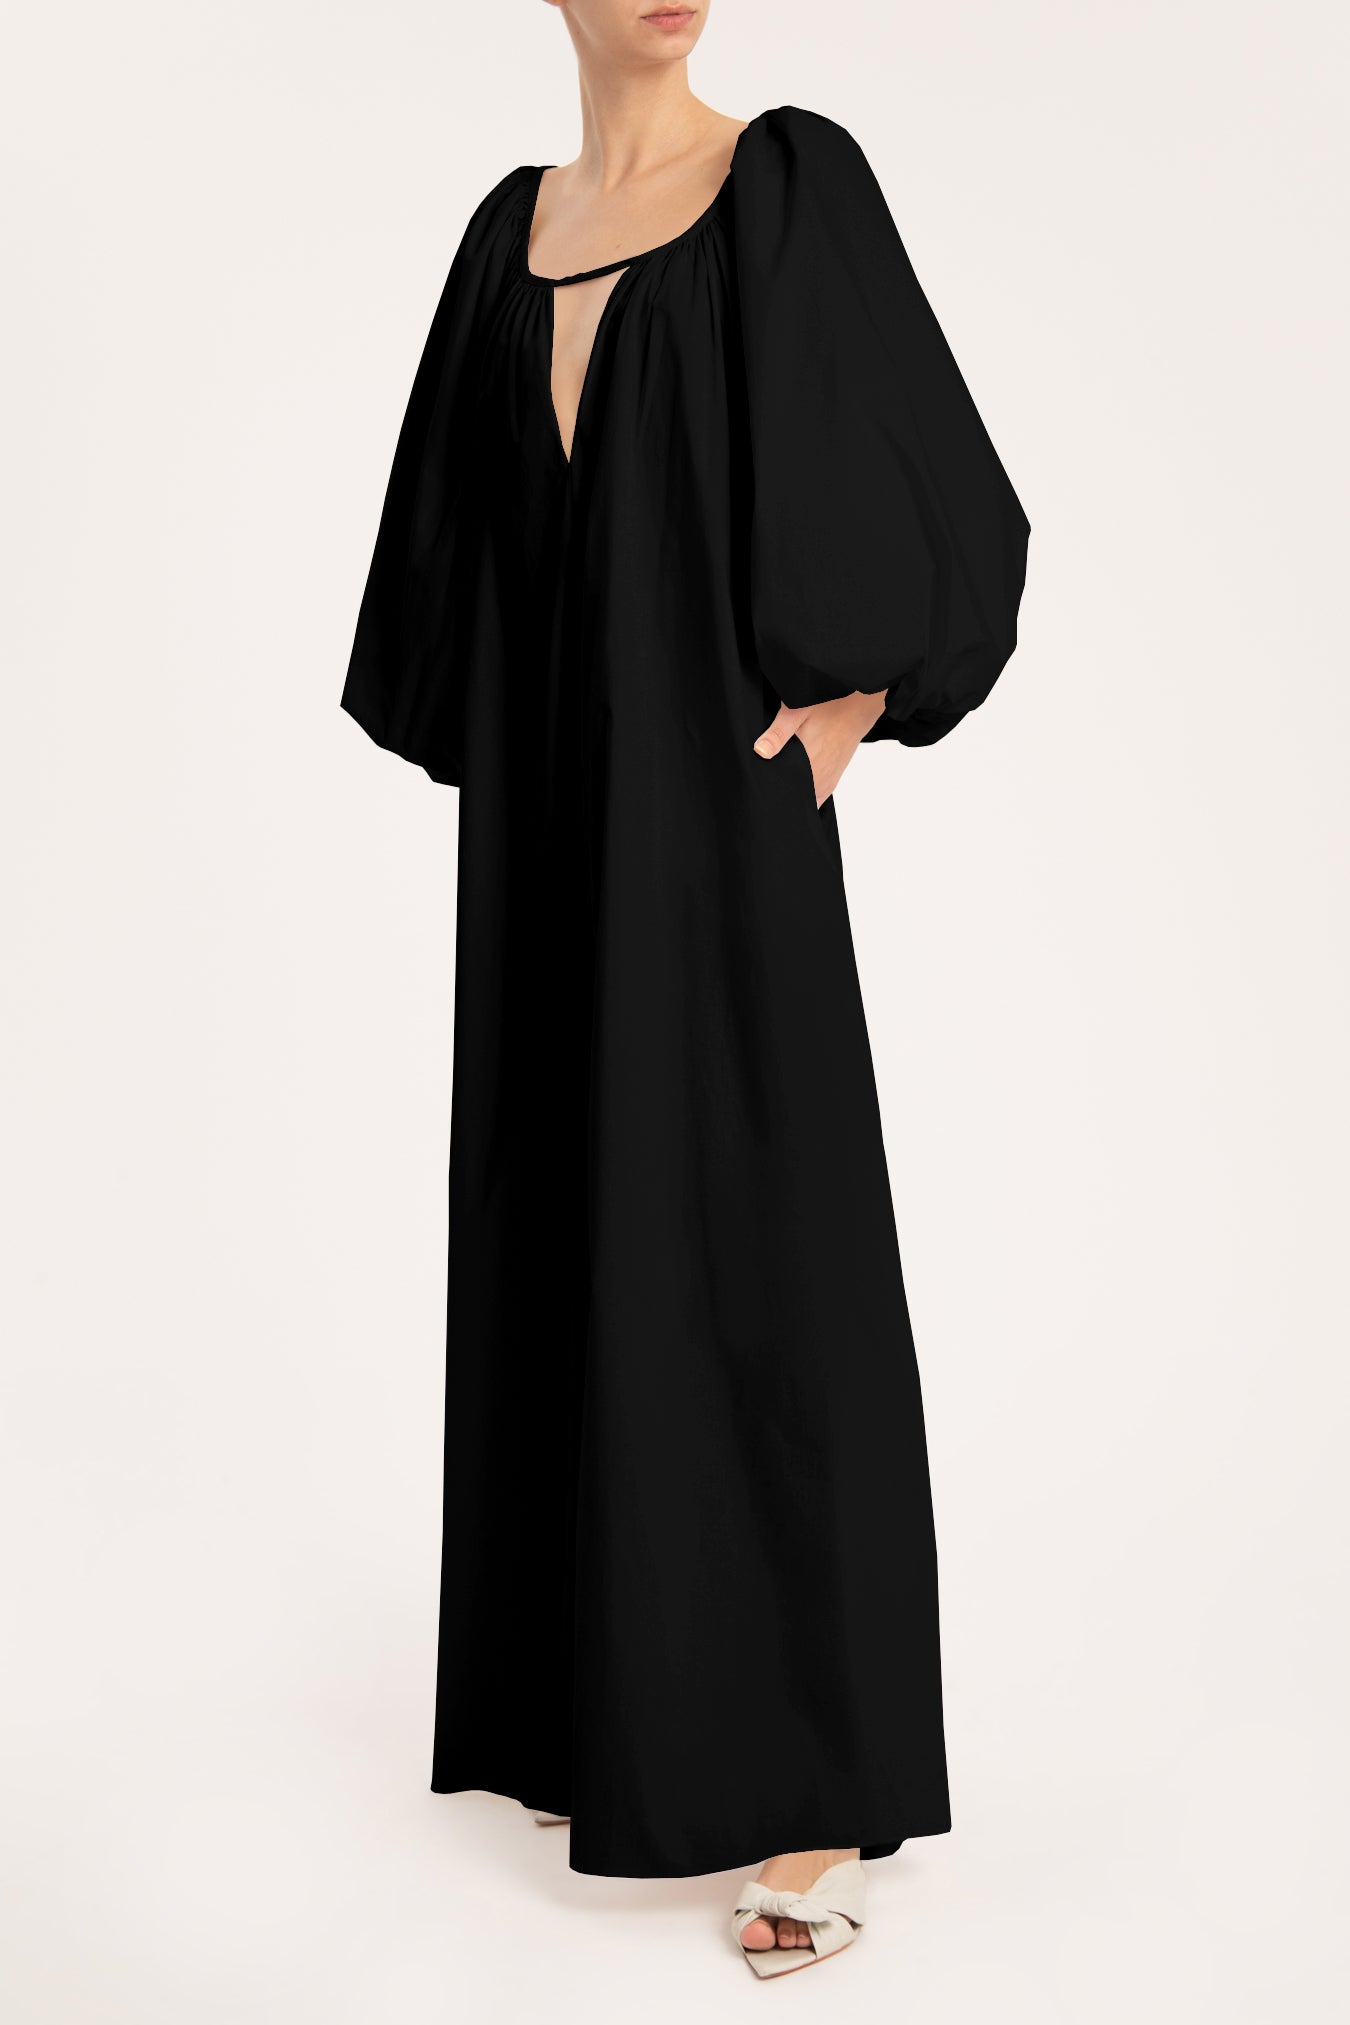 Effortless Chic Black Puff-Sleeved Long Dress Front